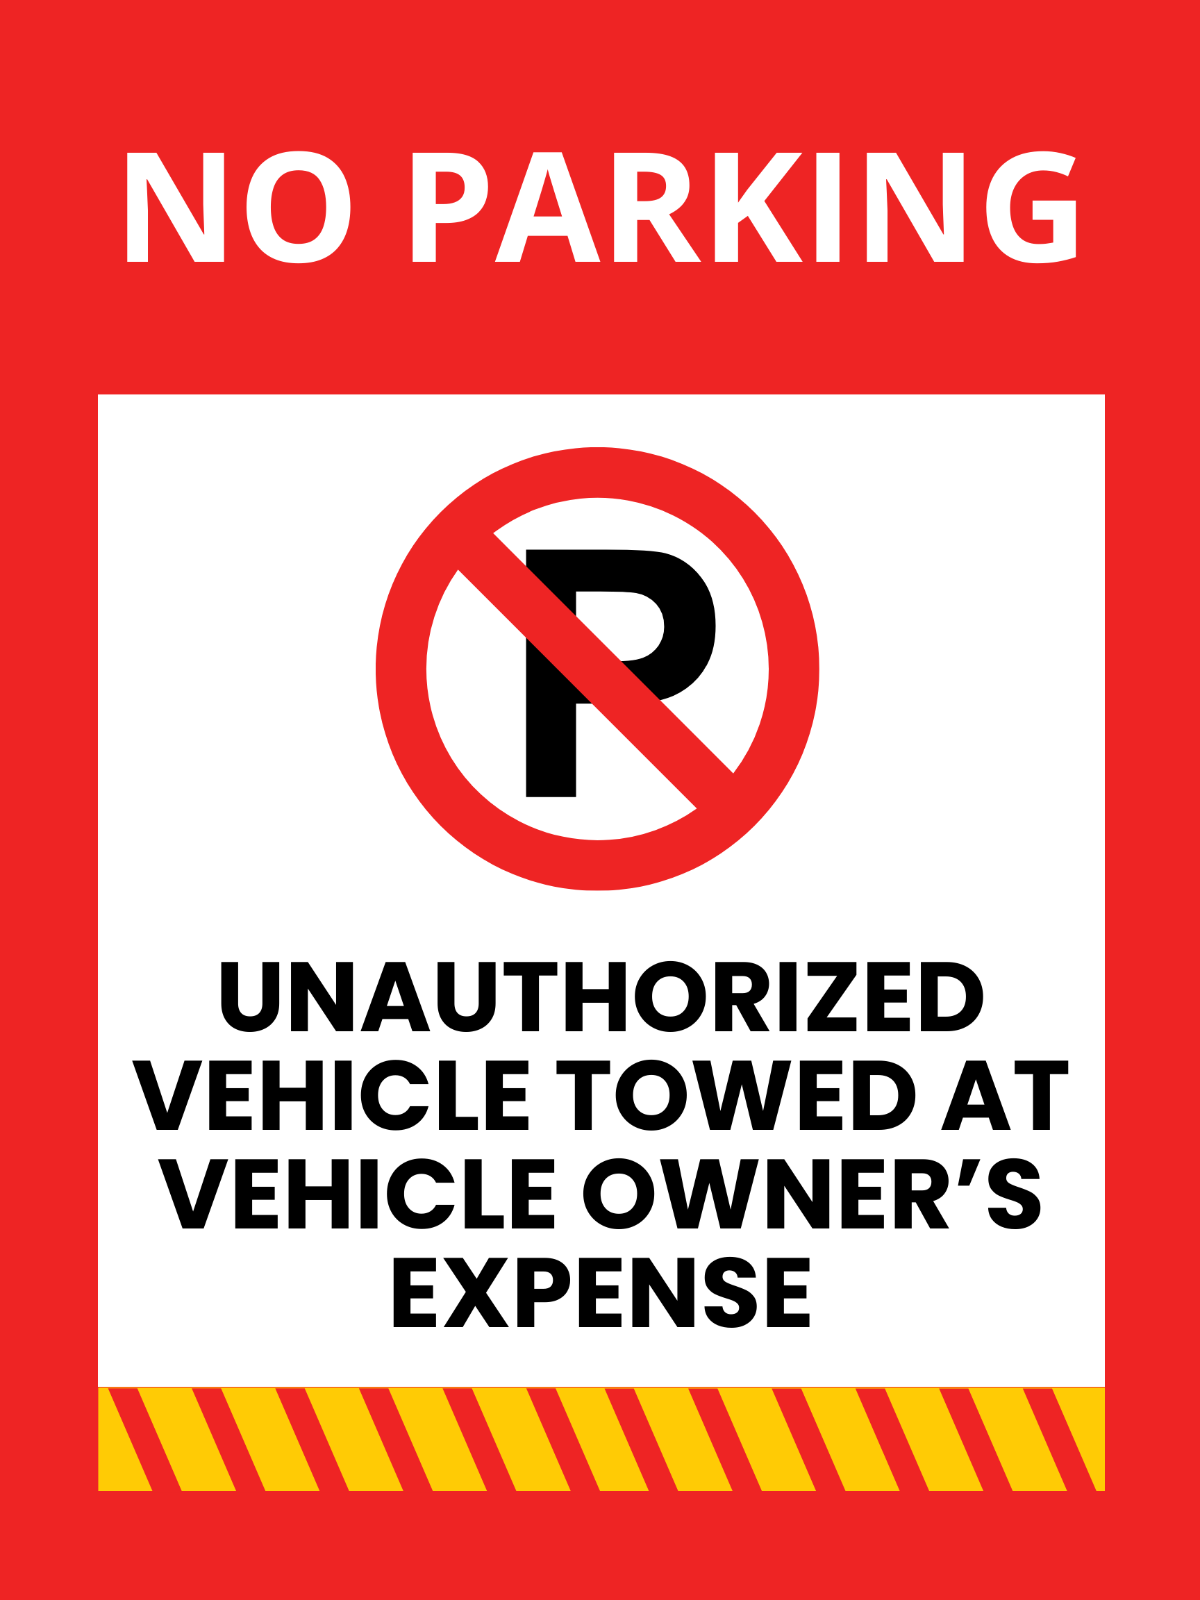 Free Construction Site Parking Sign Template